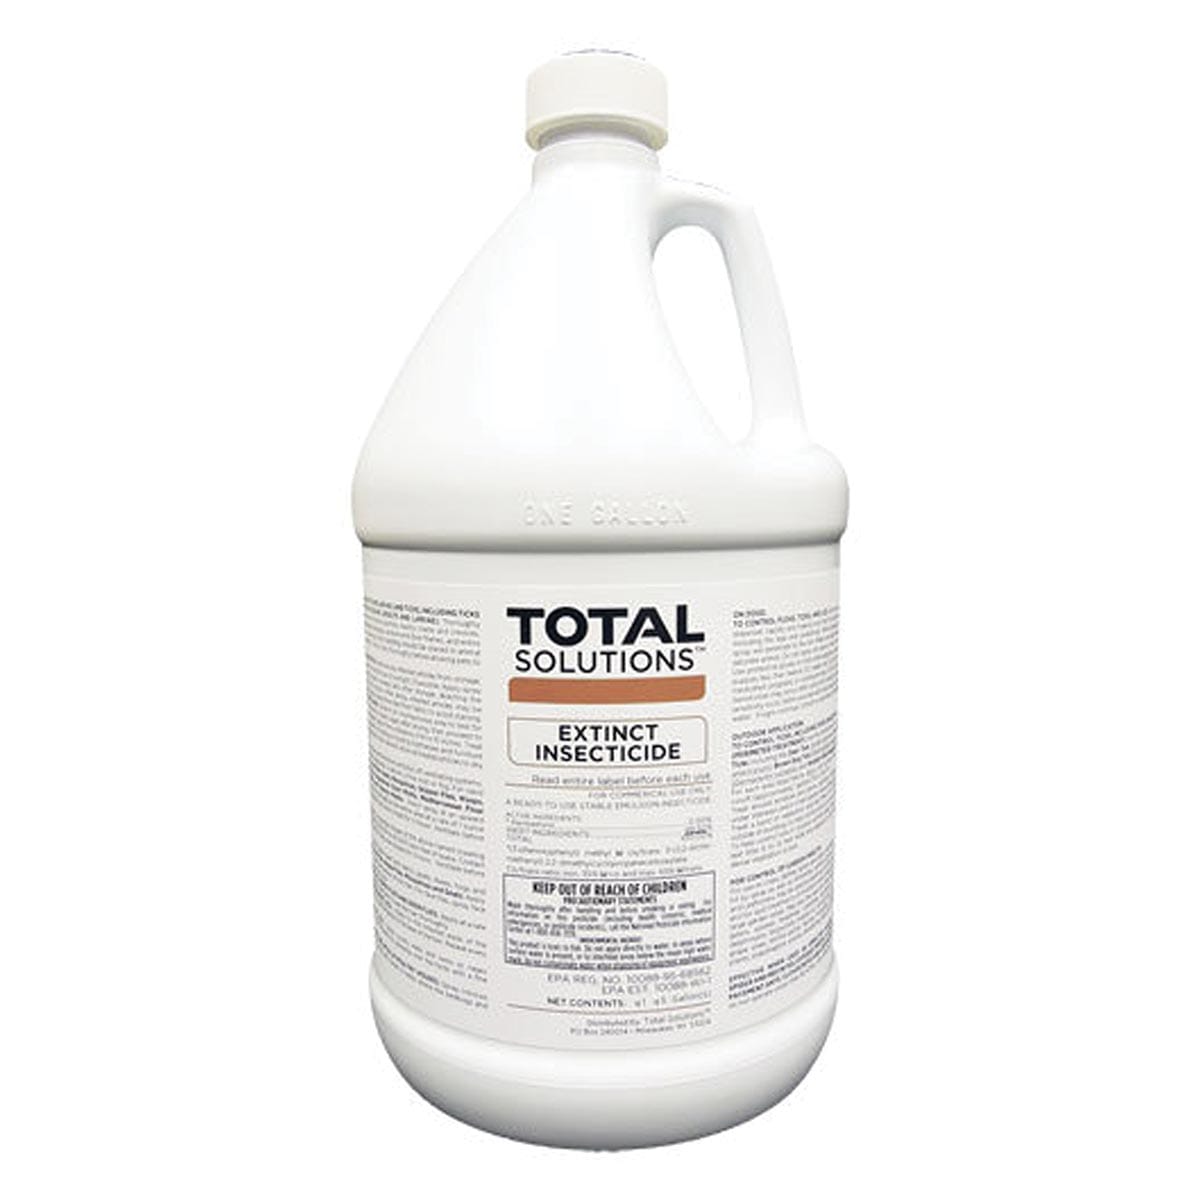 Total Solutions Extinct Insecticide, 1 gal